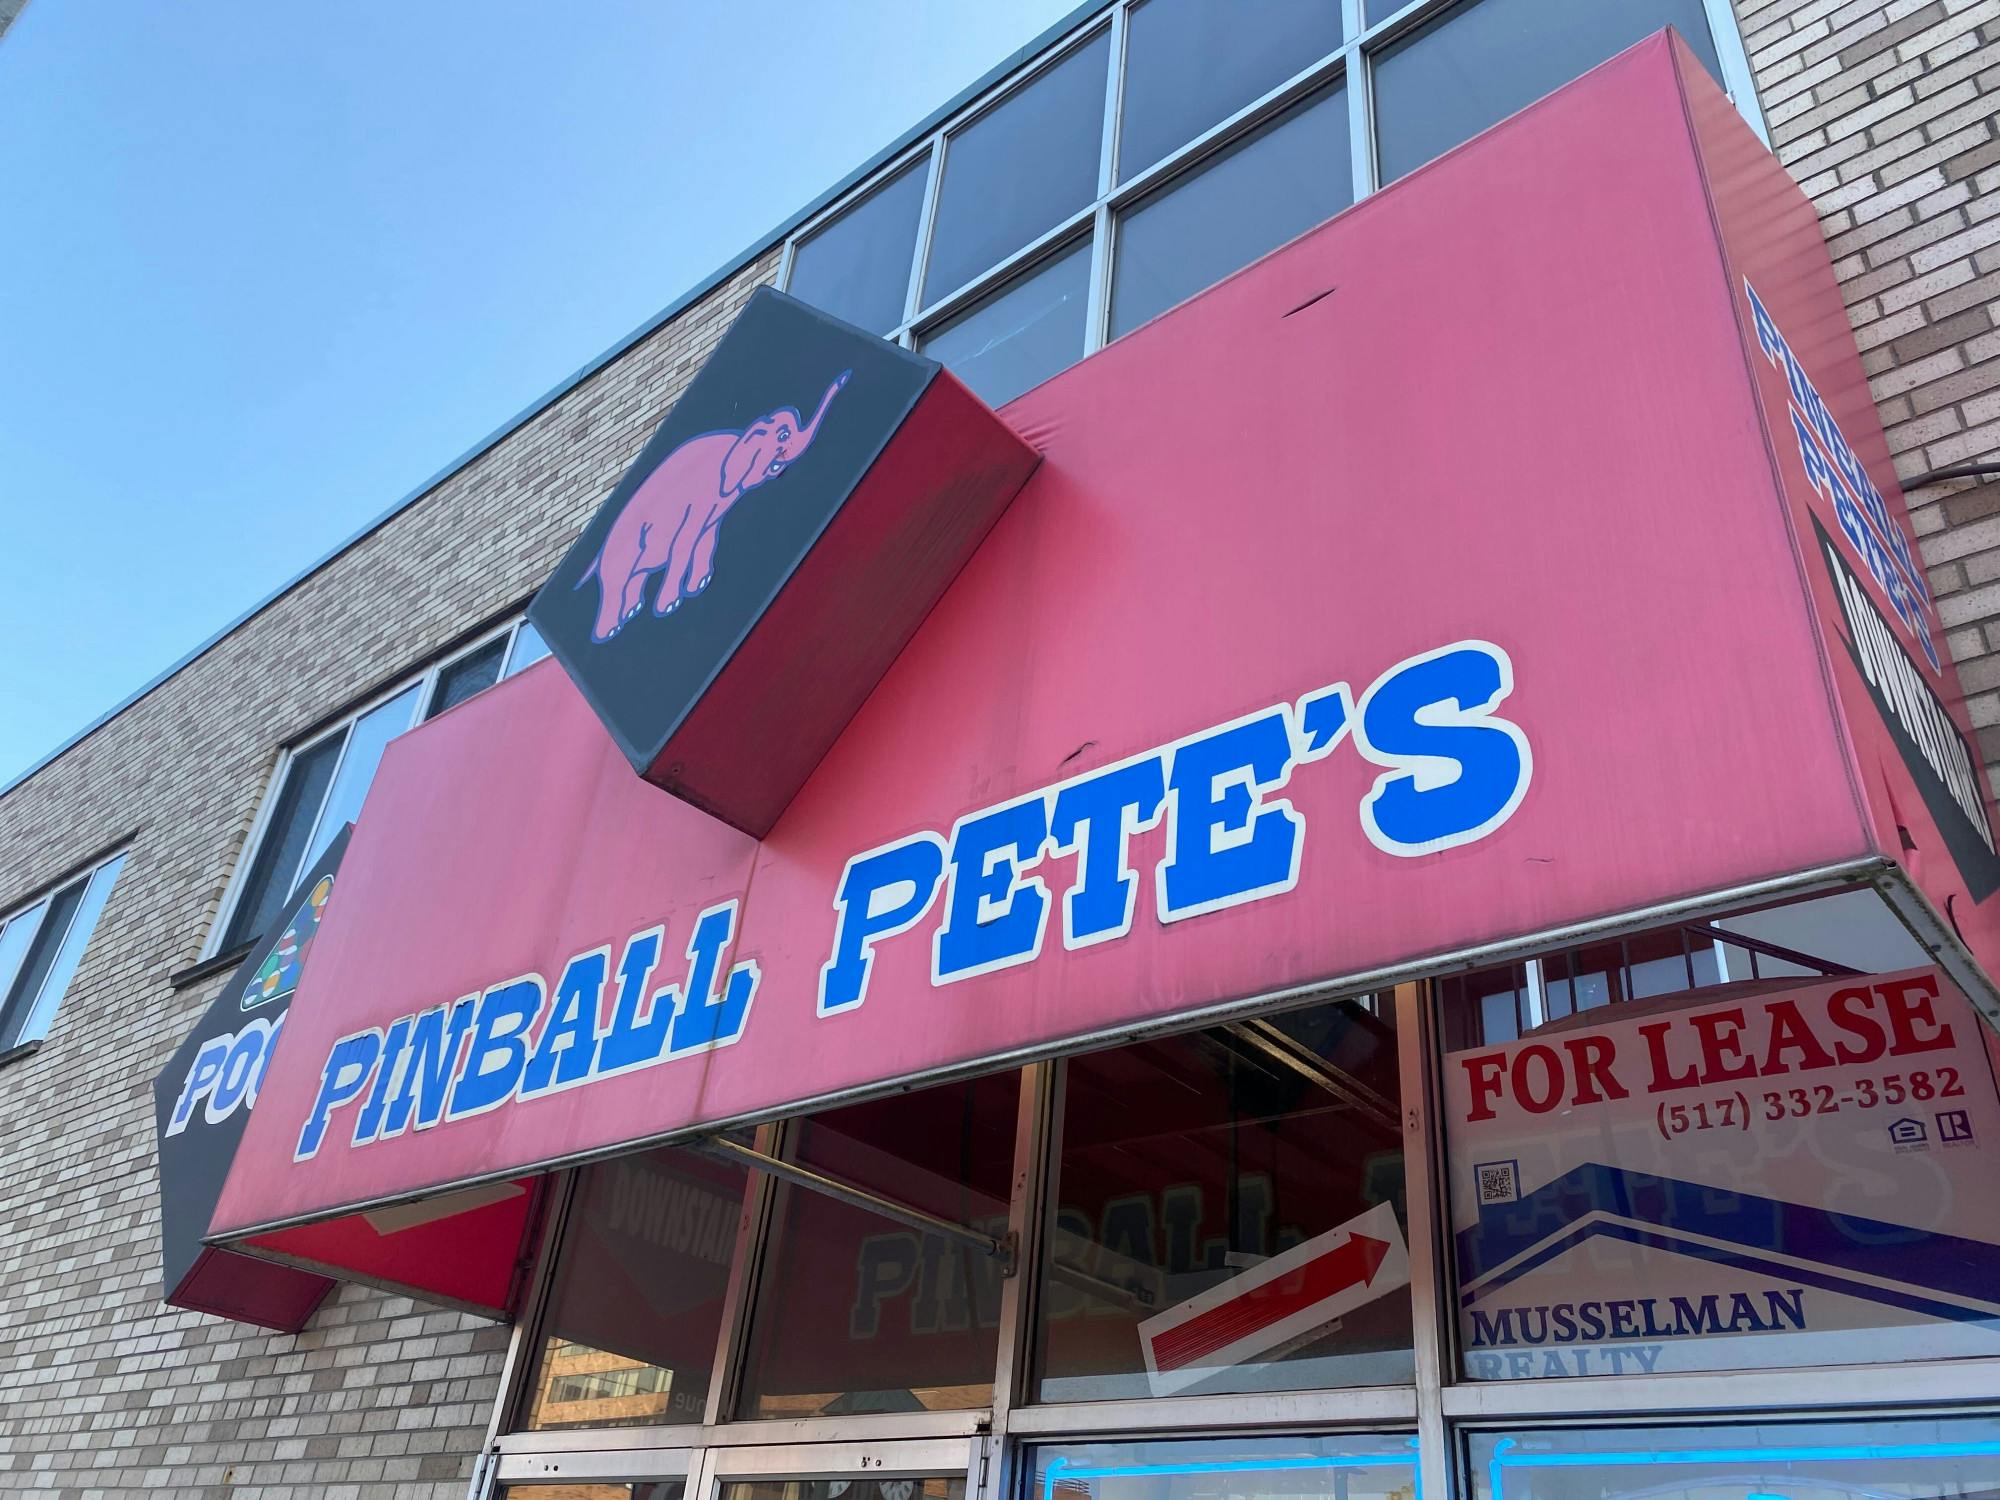 Pinball Pete's East Lansing pictured on Sept. 25, 2020.